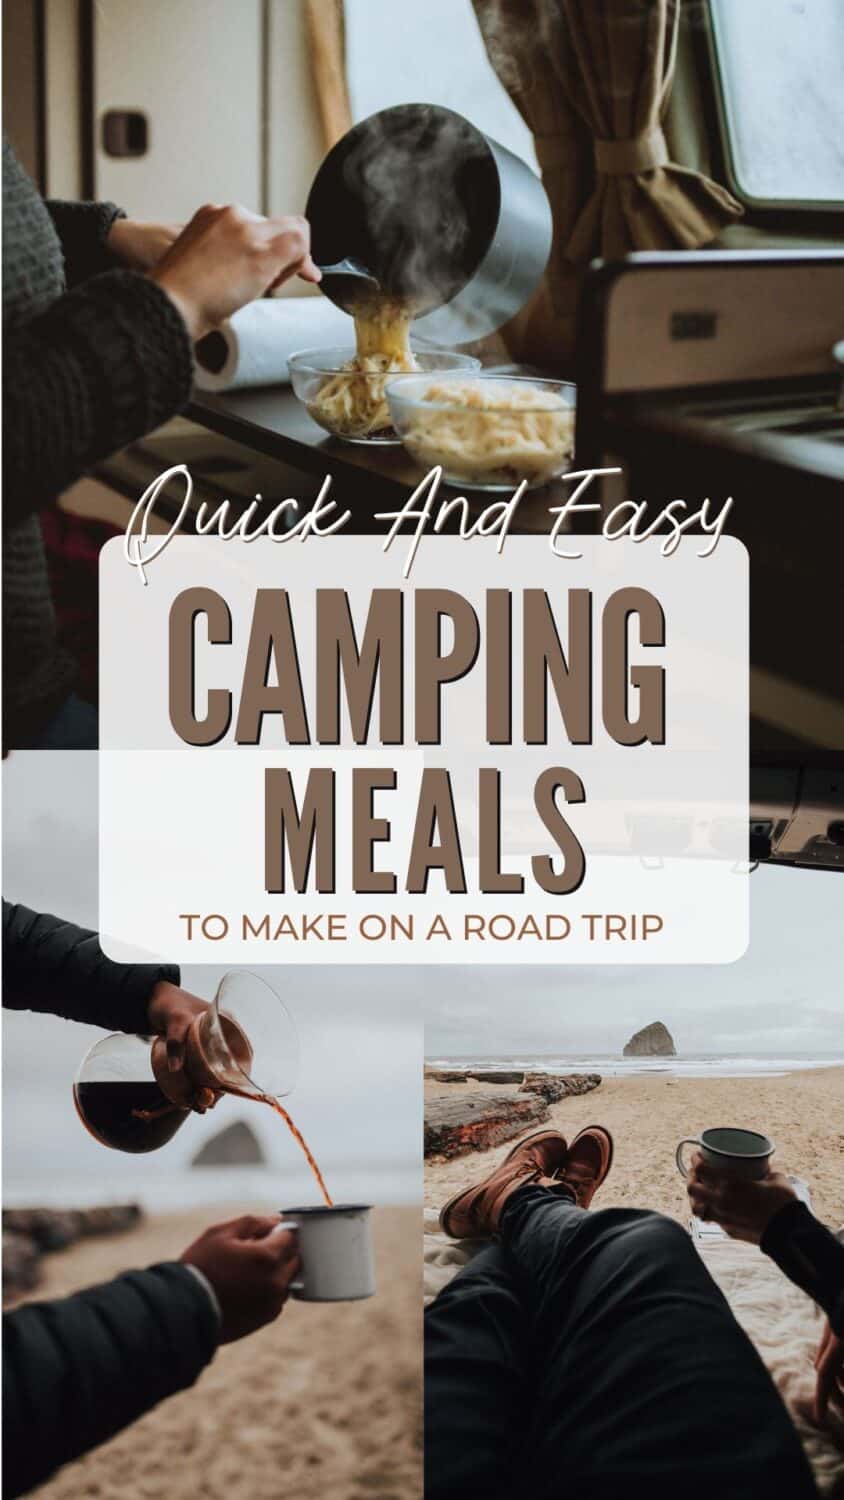 Looking for quick and easy car camping meals to make on the road? We're sharing all the best cooking tools, car camping meals, and tips on how to save money eating out while traveling! Save this post for your next adventurous road trip! #roadtrip #carcamping #campingmeals #campingrecipes #camping #easymeals #quickmeals #campfirerecipes